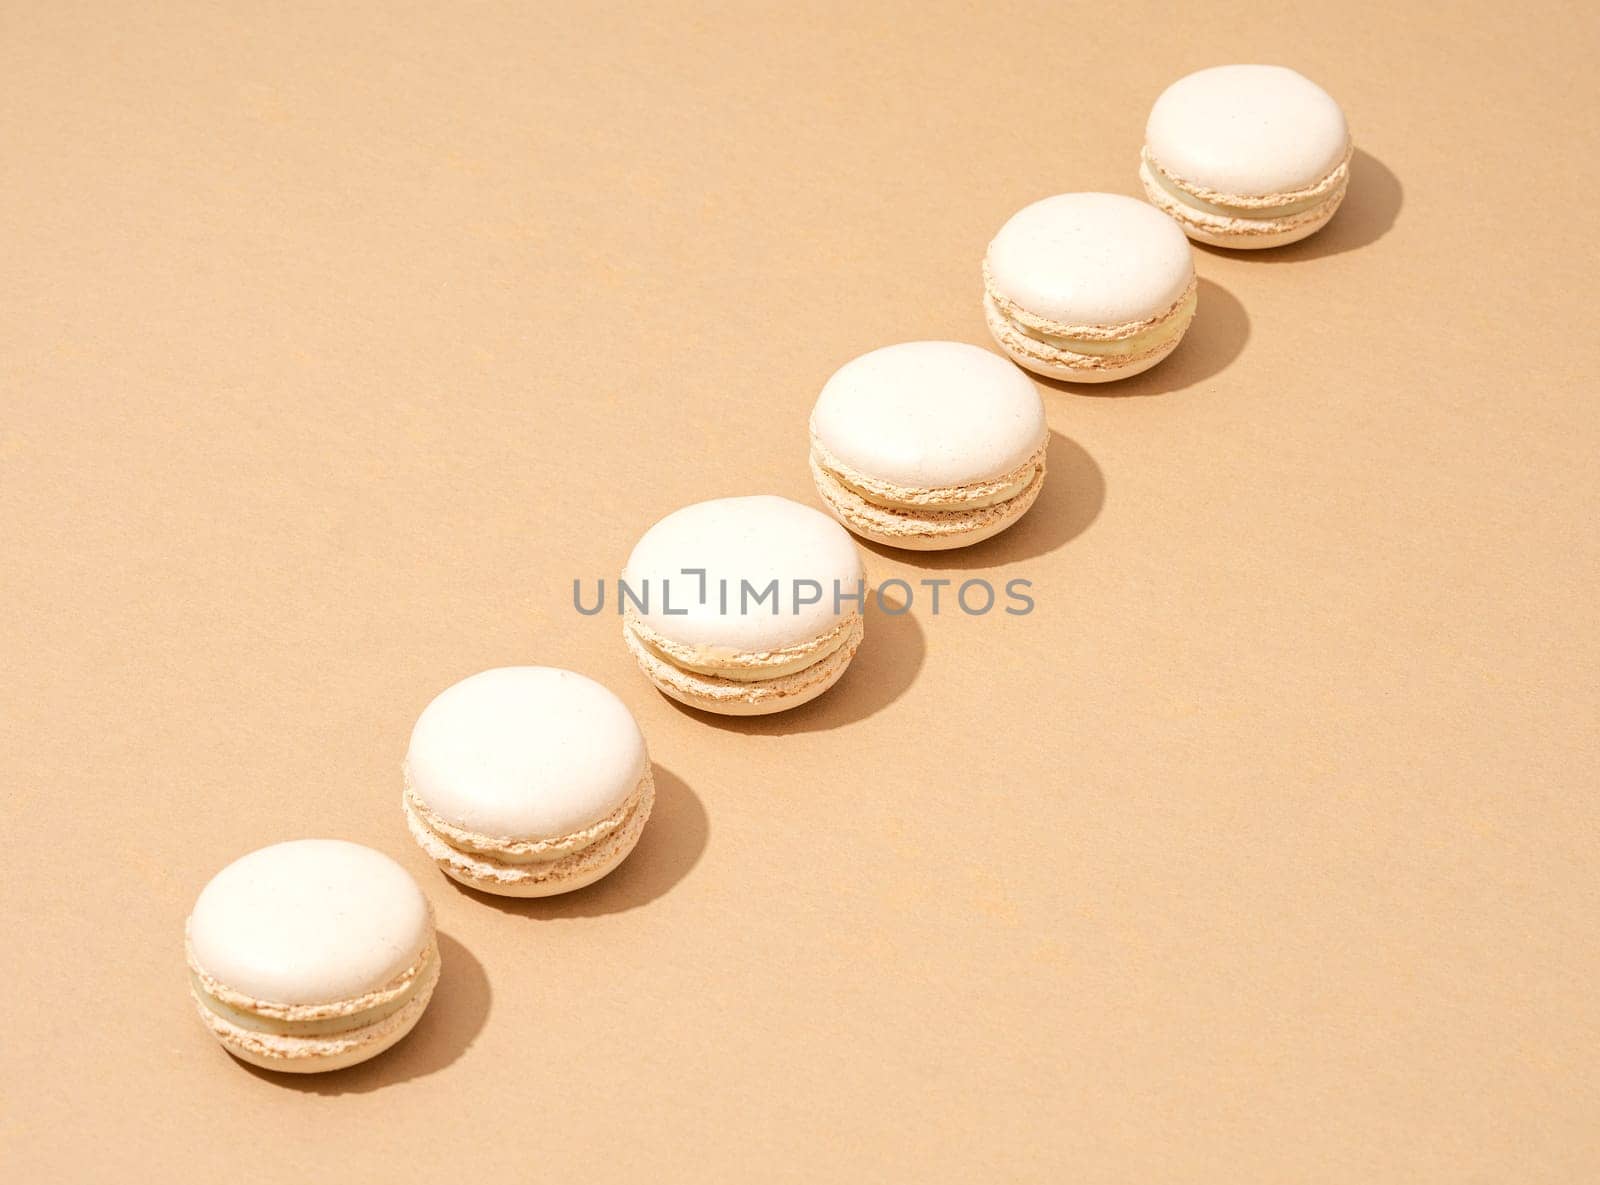 An image of white macaroons on a tan background with plenty of copy space for text or logo overlay by A_Karim